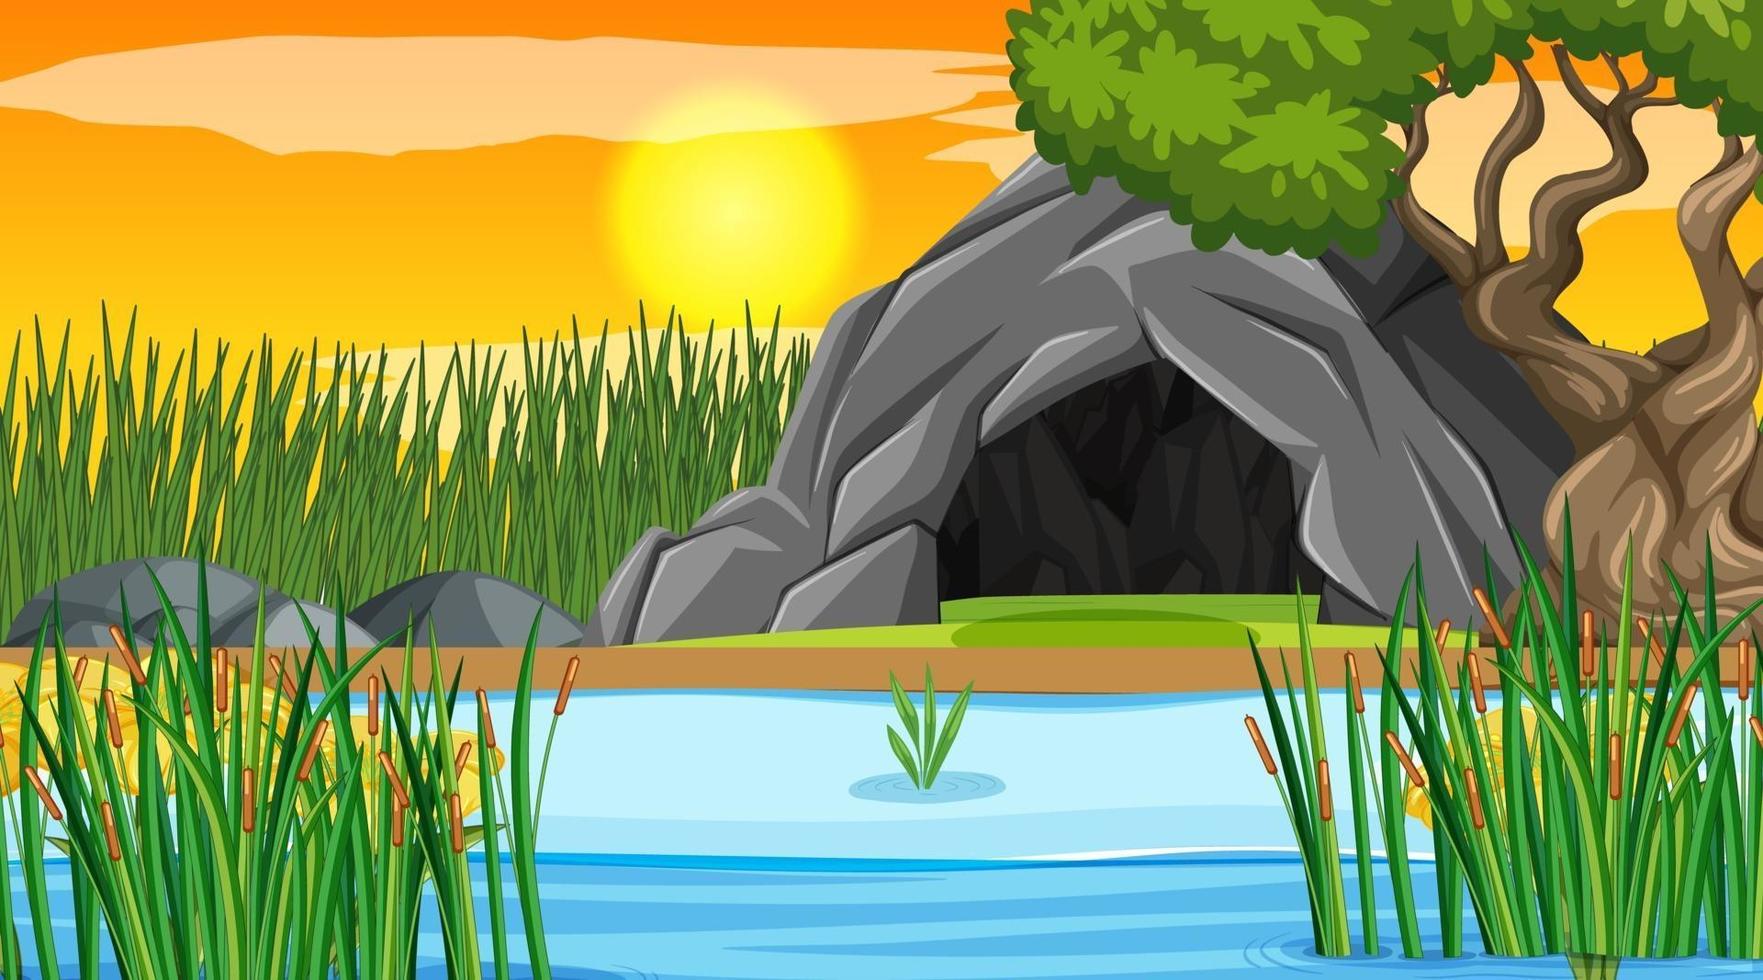 Blank landscape scene of cave in the forest at sunset time vector